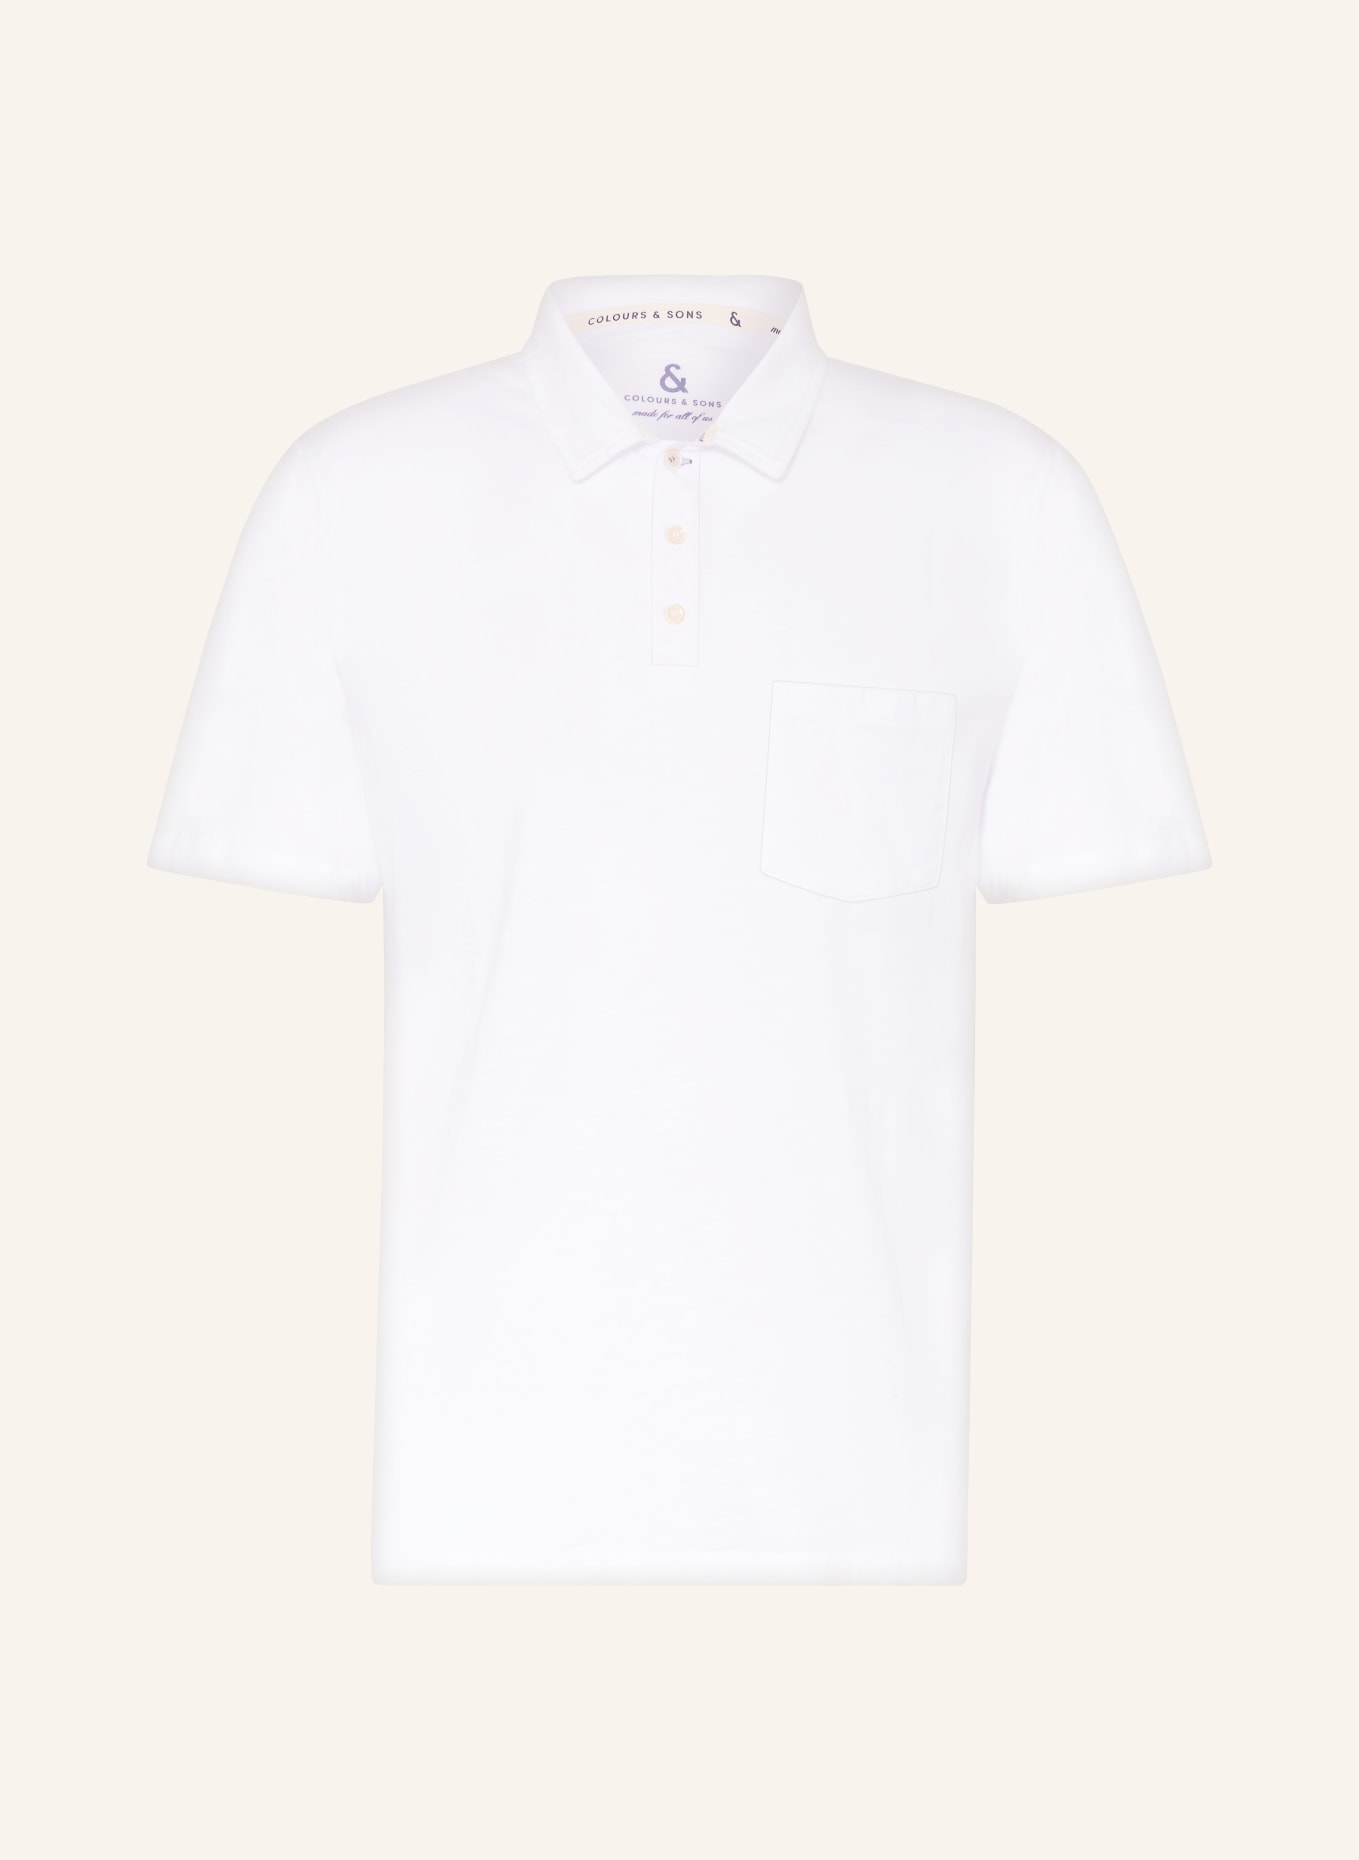 COLOURS & SONS Jersey polo shirt, Color: WHITE (Image 1)